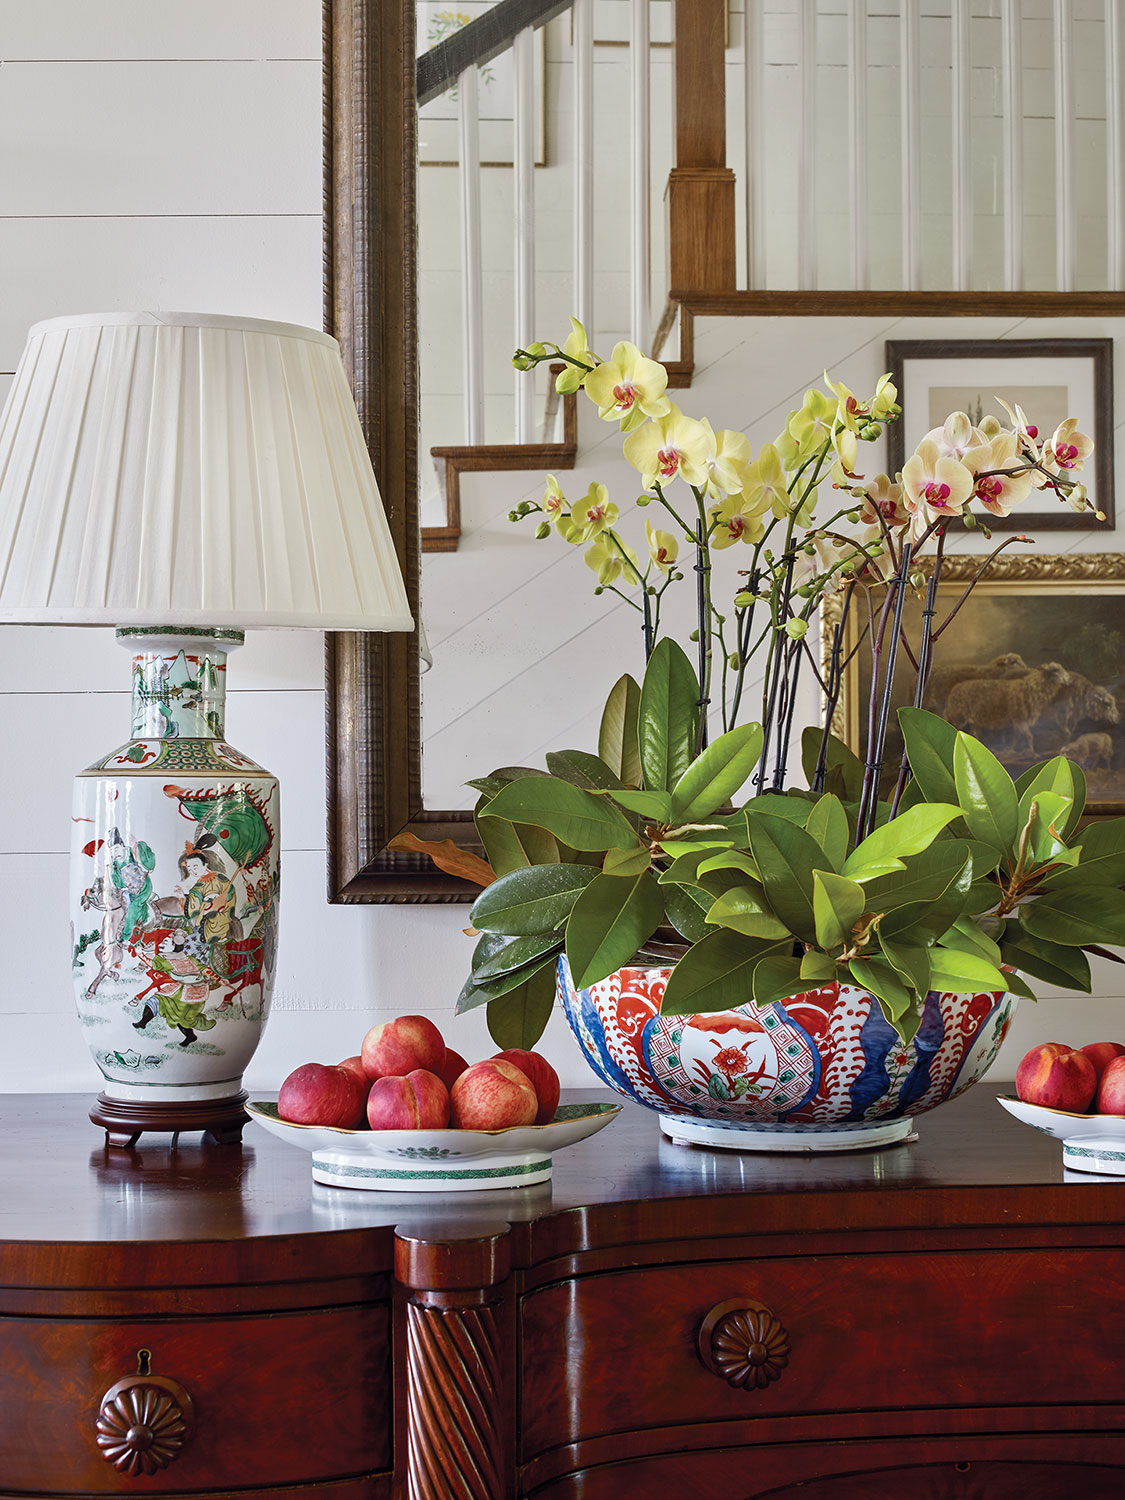 Sideboard set with lamp and large bowl filled with phalaenopsis orchids and magnolia branches.